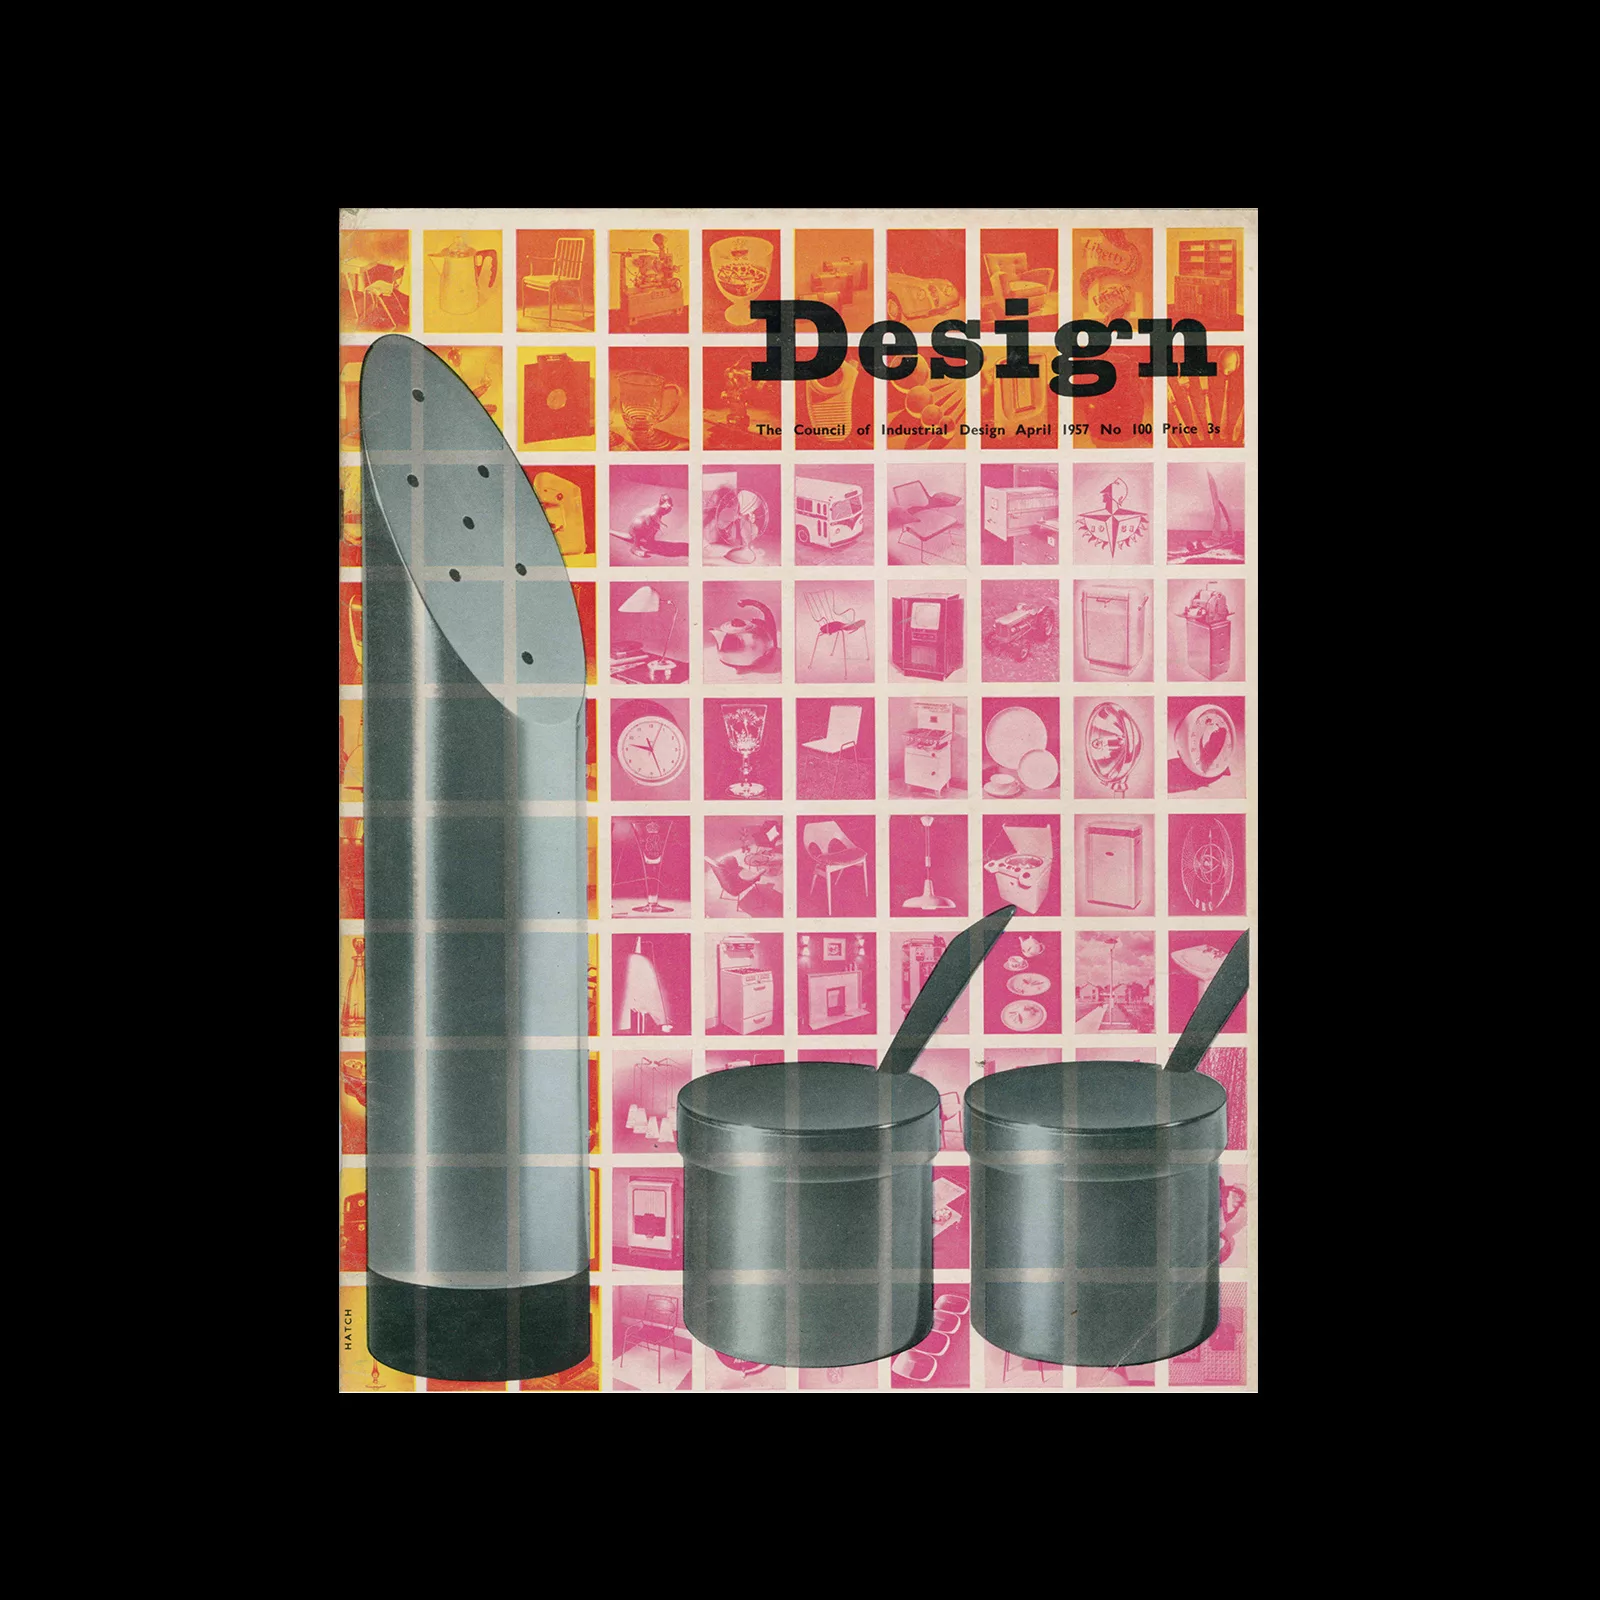 Design, Council of Industrial Design, 100, April 1957. Cover design by Peter Hatch